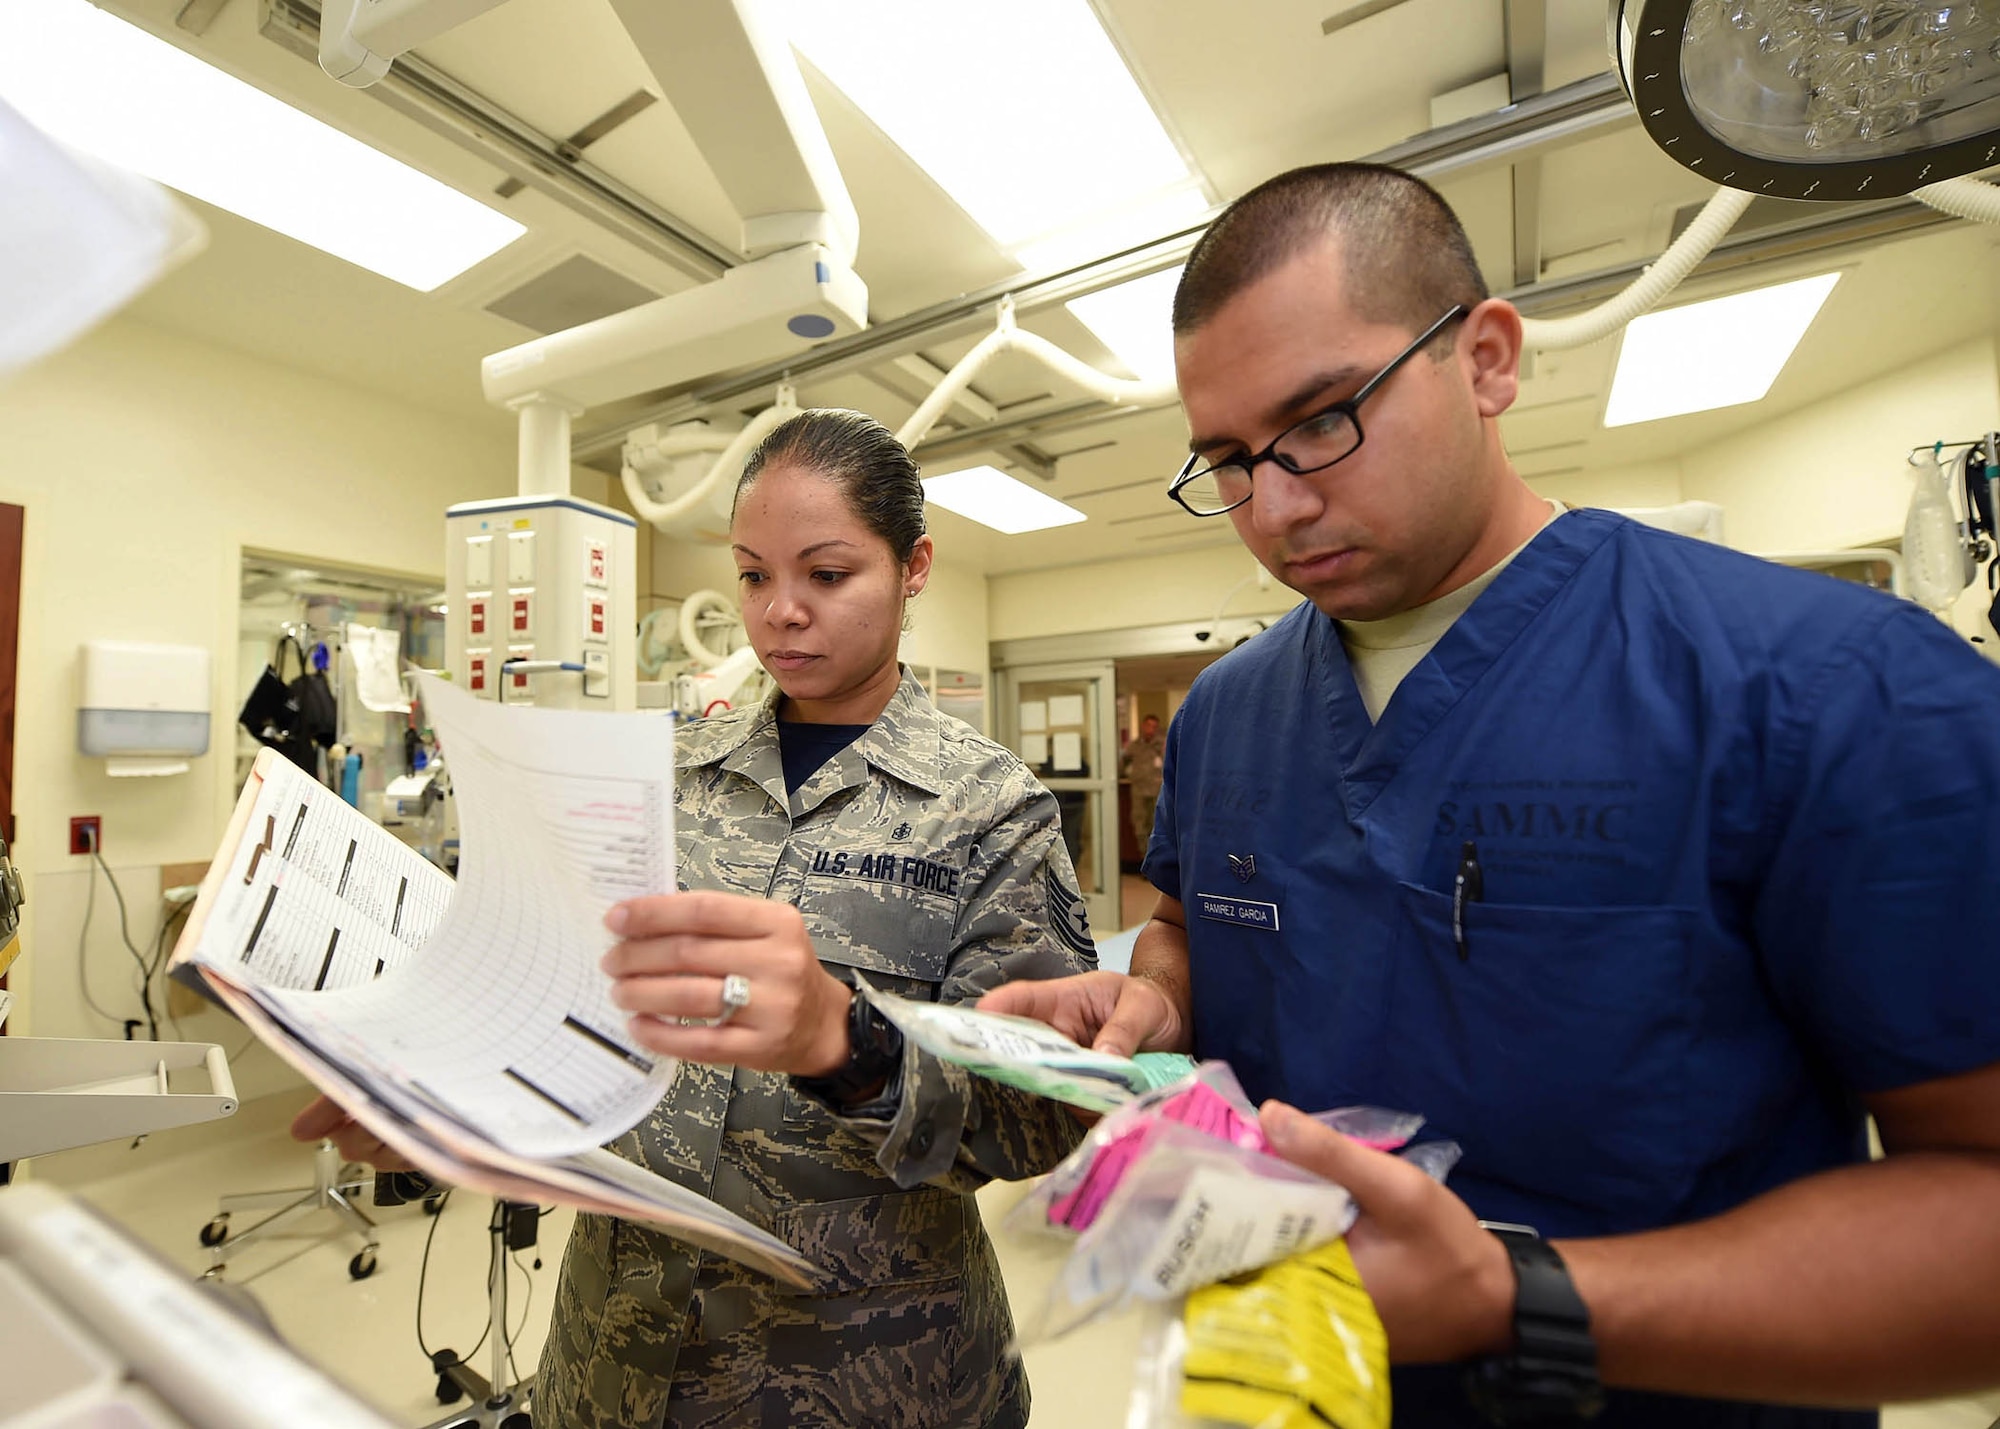 Tech. Sgt. Latoya Carson and Senior Airman Ernesto Ramirez Garcia, medical technicians from the 959th Medical Group, take inventory of supplies in the emergency room at the San Antonio Military Medical Center, Joint Base San Antonio-Fort Sam Houston, Aug. 7, 2015. The 959th MDG works with Army counterparts at SAMMC to staff the only Level 1 trauma center in the Department of Defense. (U.S. Air Force photo by Staff Sgt. Jerilyn Quintanilla) 